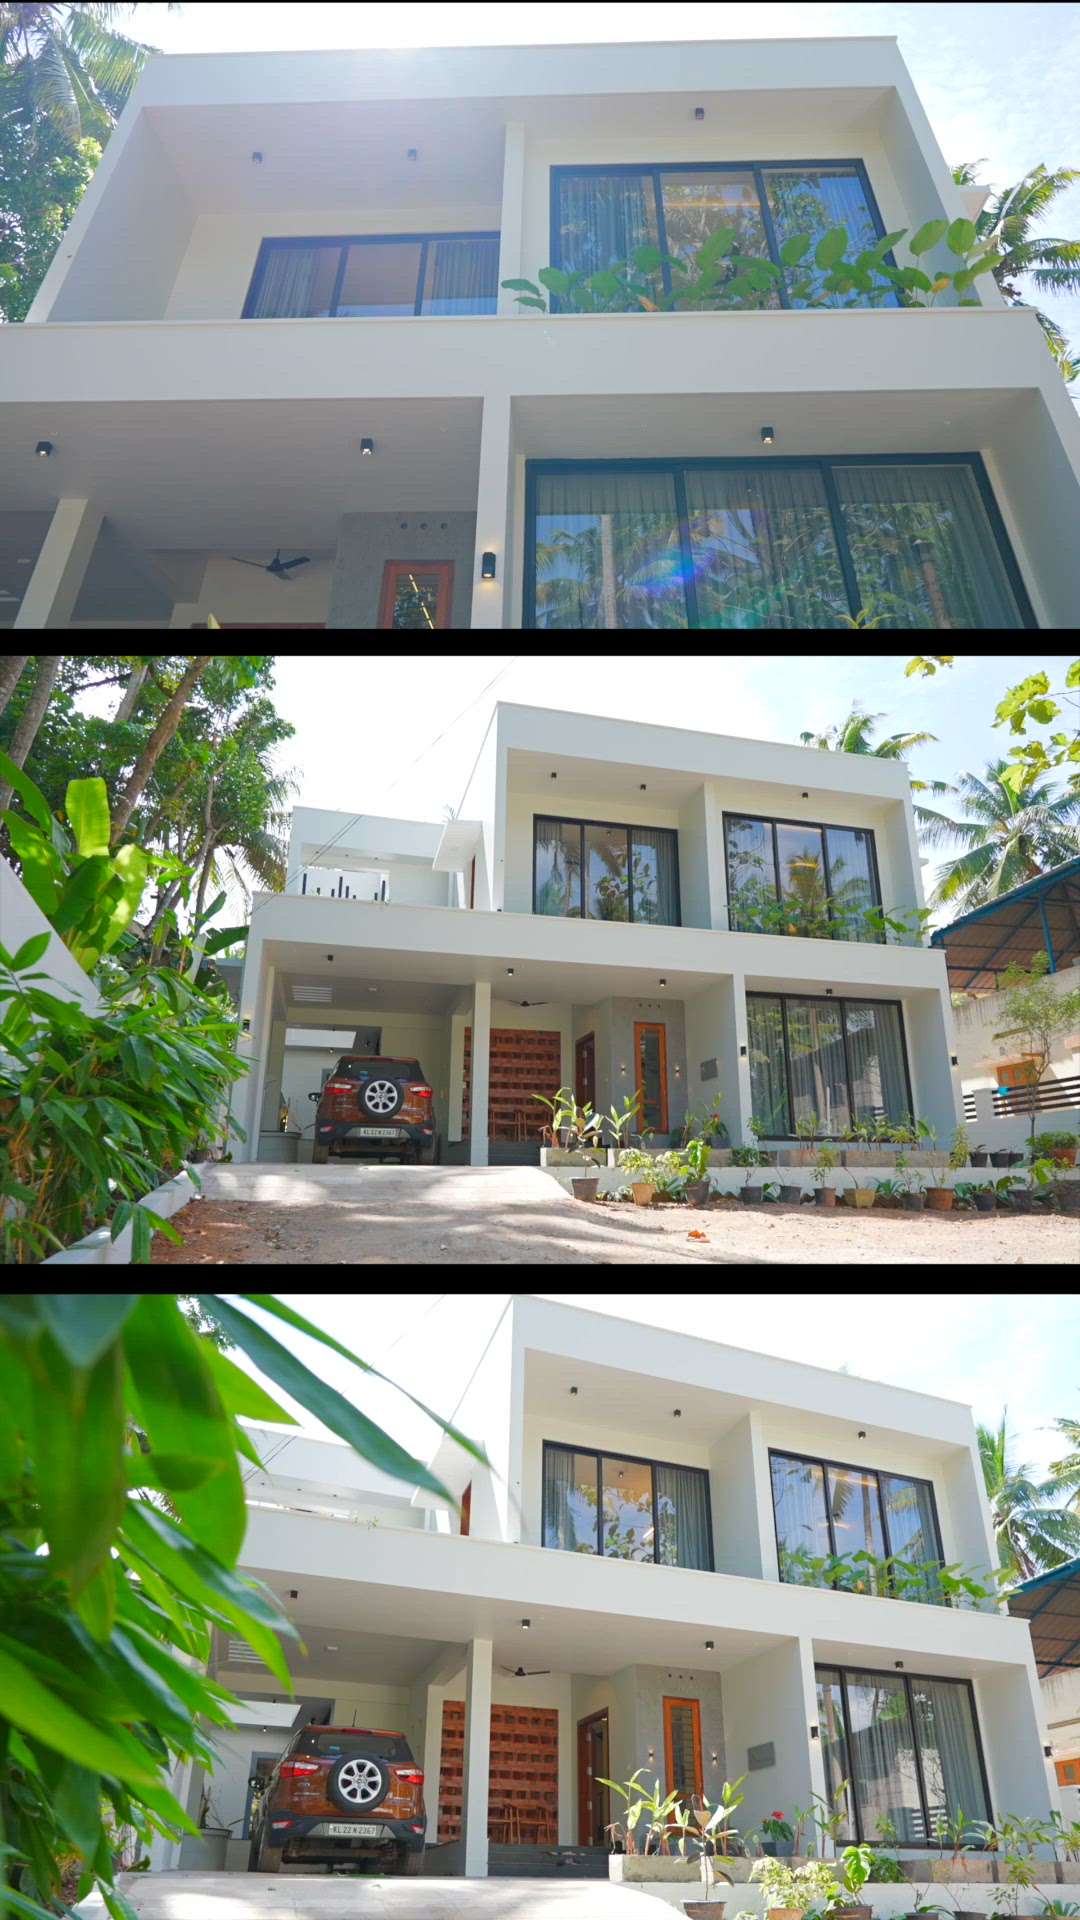 🏘️Completed Project ♥️Aadhithya Hrudayam🥰📍Sreekaryam, Tvm
Happy with our Solmate Client Mr. Abhilash &Family 🤝
Where Designs Meet Dreams, Creating more than just Interiors, also creating a new Relationship Bond🤝.
.

It is to that Clint that we owe the most for a project to be a success, so when the beauty and the concept in the mind came together, it took on a new color.

ꜰᴏʀ ʏᴏᴜʀ ᴄᴏᴍᴩʟᴇᴛᴇ ɪɴᴛᴇʀɪᴏʀ ʀᴇqᴜɪʀᴇᴍᴇɴᴛꜱ, ᴄᴏɴᴛᴀᴄᴛ ᴜꜱ : +91-9605072359. Or +91-9778414200.
.

#interiordesign #morespaceconcepts #trivandrum #bestinterior #dreamhome #luxuryinterior #kitcheninterior #architecture #interior #trending #homedecor #home #traditional #modularinteriors #ownfactory #thiruvananthapuram #reels #koloapp #koloviral #kolokerala #ClosedKitchen #KitchenIdeas #LivingroomDesigns #LivingRoomTable #LivingRoomPainting #livingroompartition #LivingRoomSofa #LUXURY_SOFA #LUXURY_INTERIOR #keralahomedesignz #keralahousedesigns #keralahomeconcepts #interiorideas #InteriorDesigner #Architect